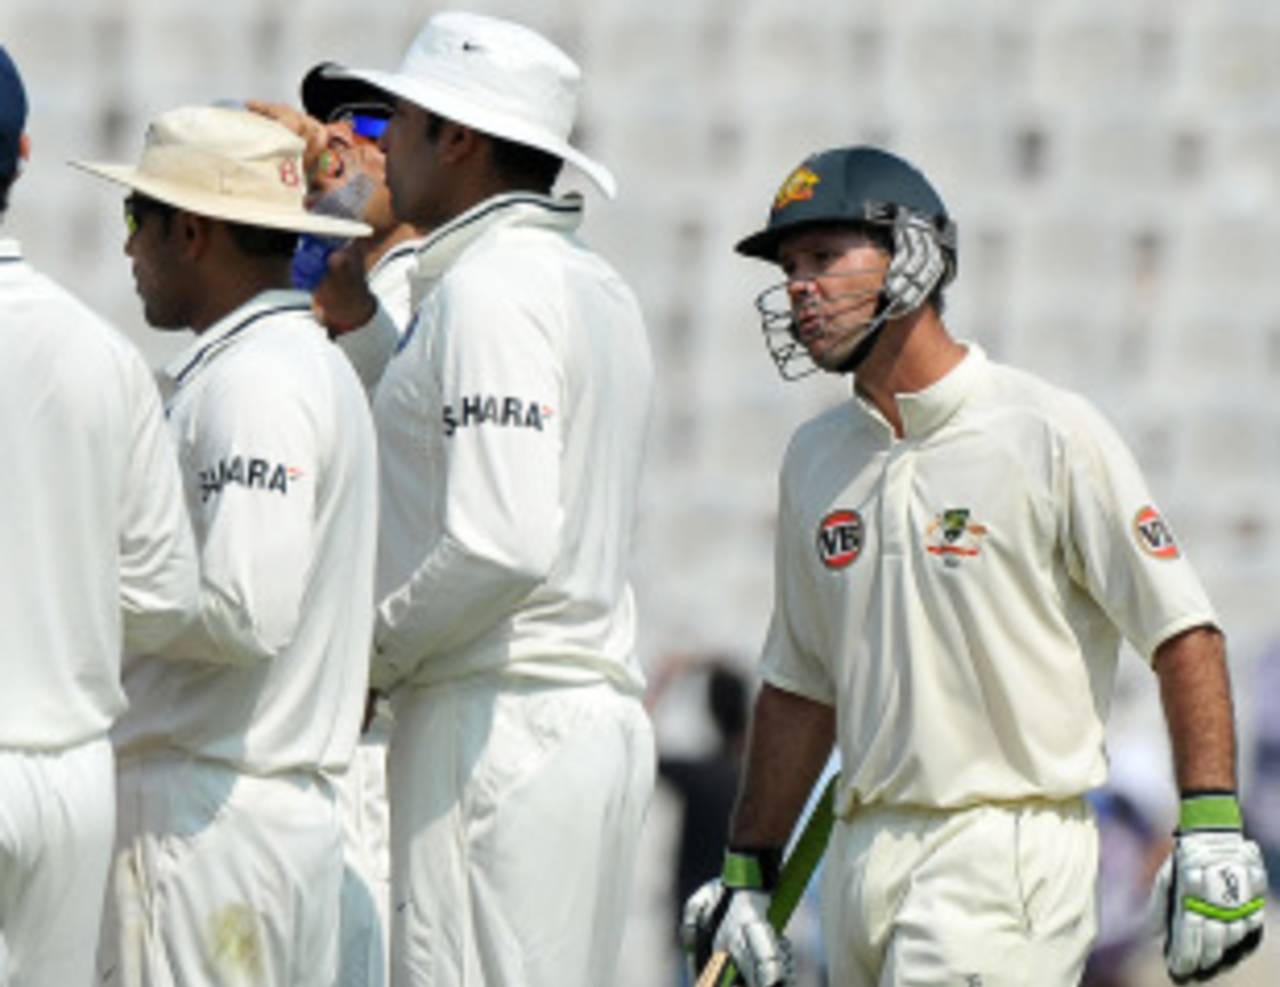 Ricky Ponting exchanges words with India's fielders after his dismissal, India v Australia, 1st Test, Mohali, 1st day, October 1, 2010